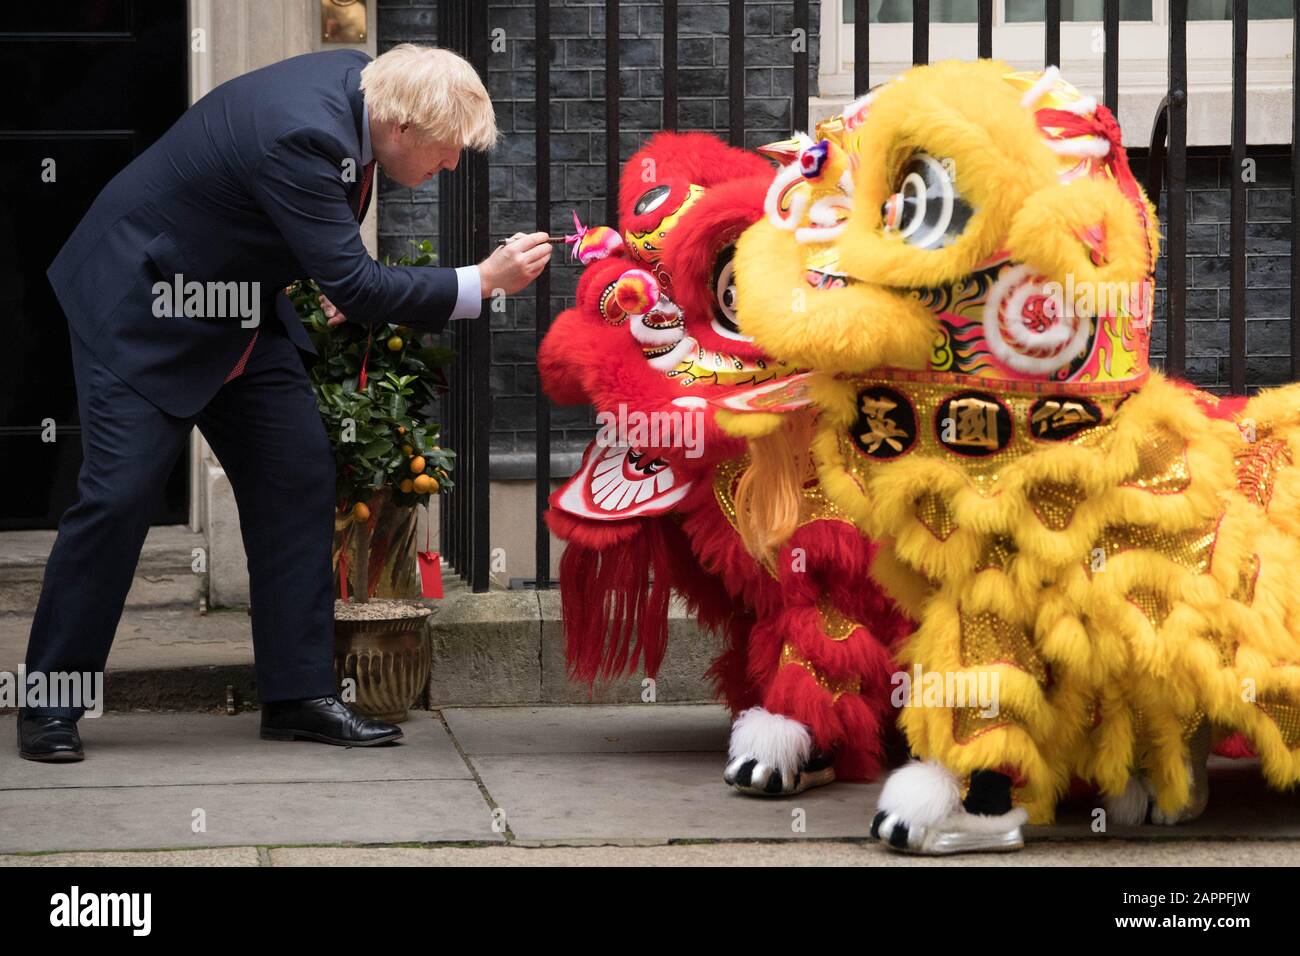 Prime Minister Boris Johnson welcomes members of the Chinese community at 10 Downing Street, London, in celebration of the Chinese New Year. Stock Photo